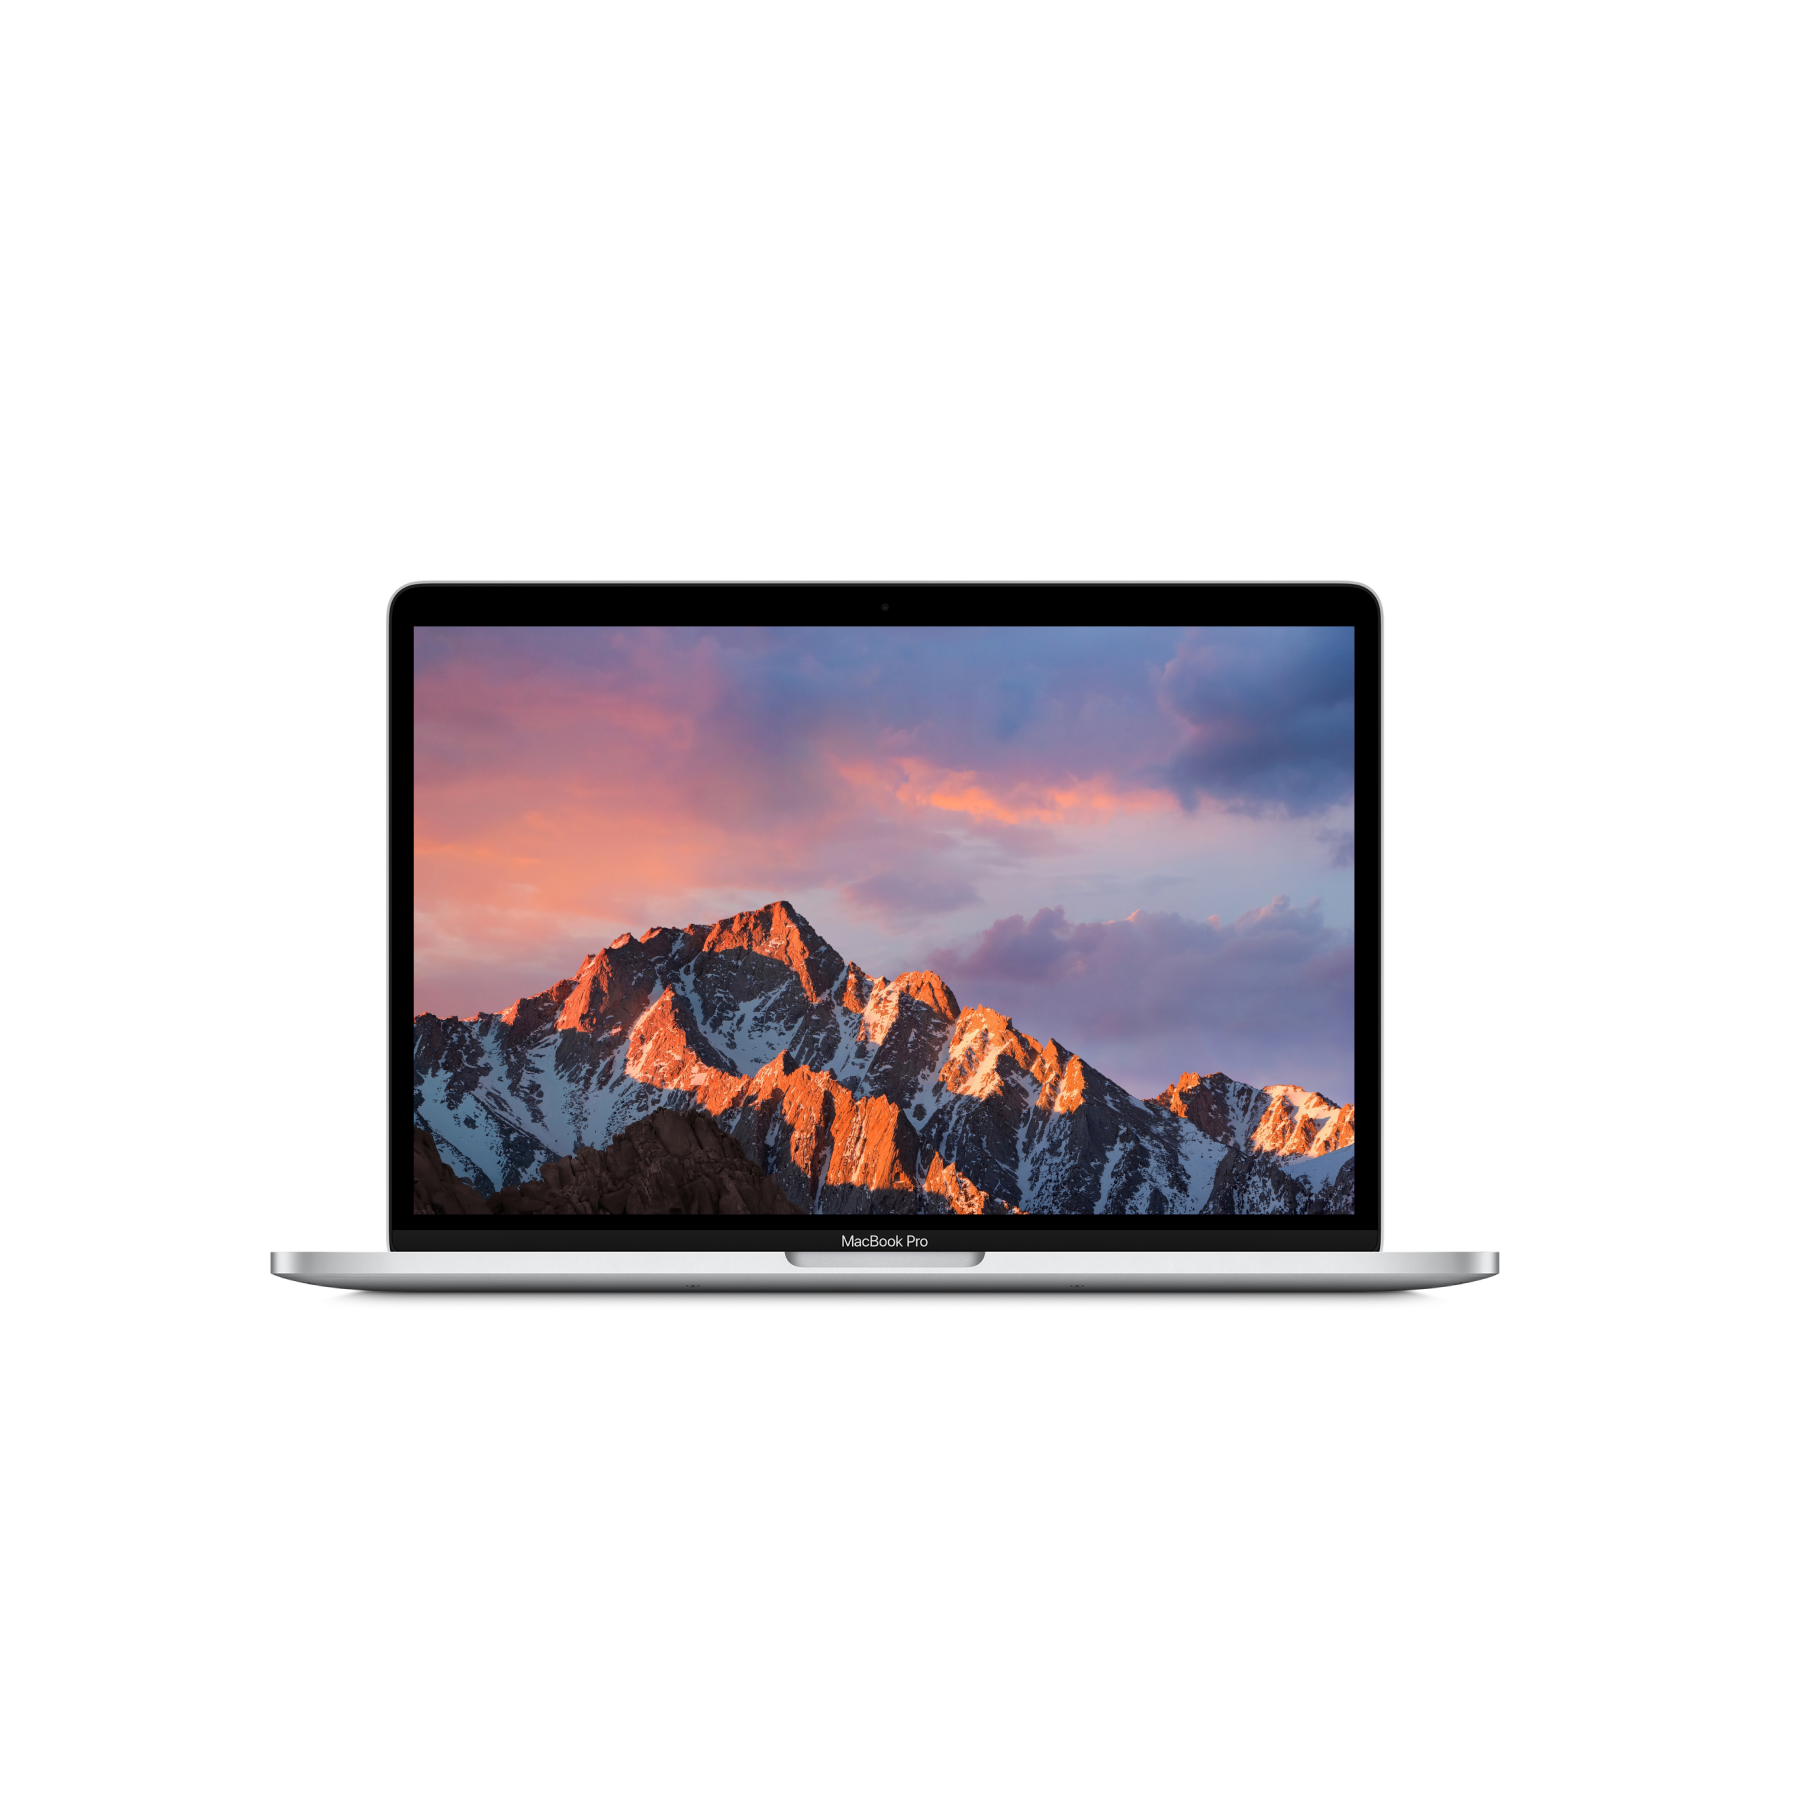 MacBook Pro (13-inch, 2016, Four Thunderbolt 3 ports) - iStore Pre-owned